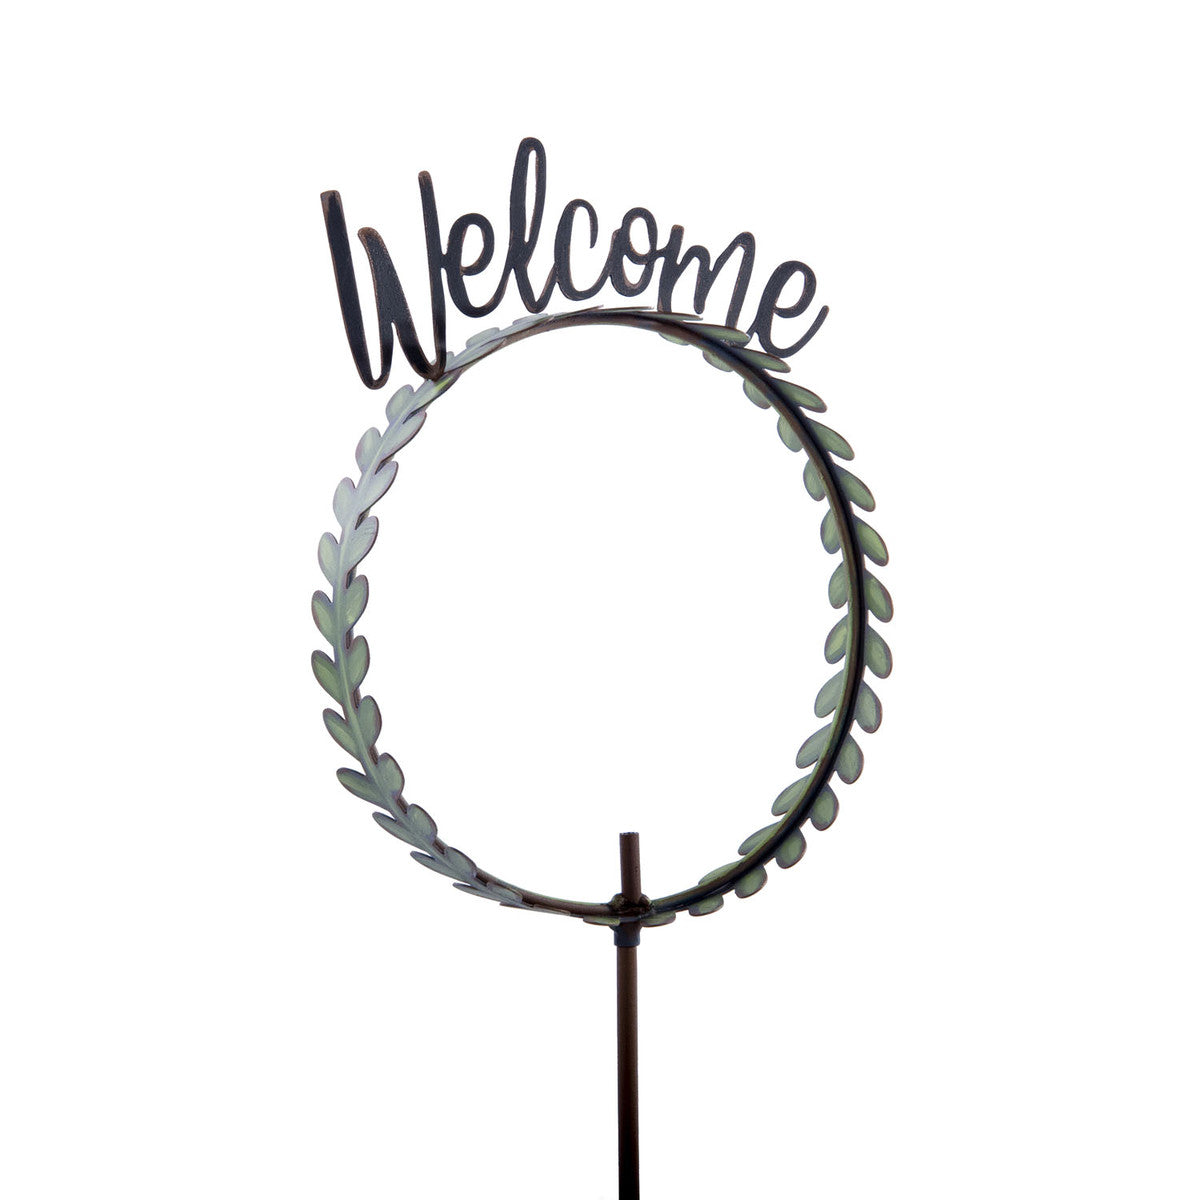 "Welcome" Wreath Finial Holder